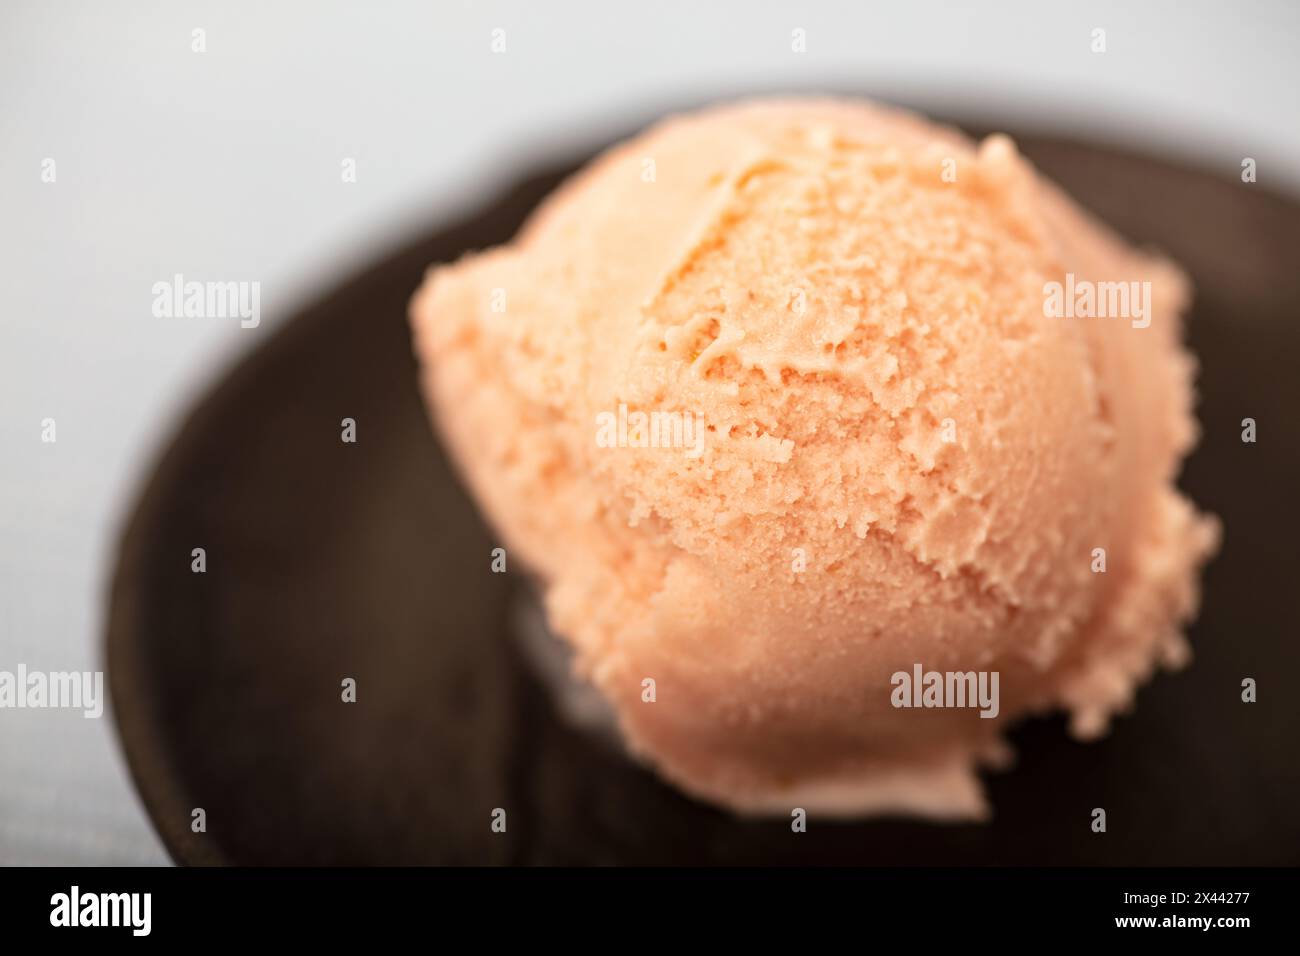 A fresh scoop of homemade strawberry ice cream in a black bowl Stock Photo